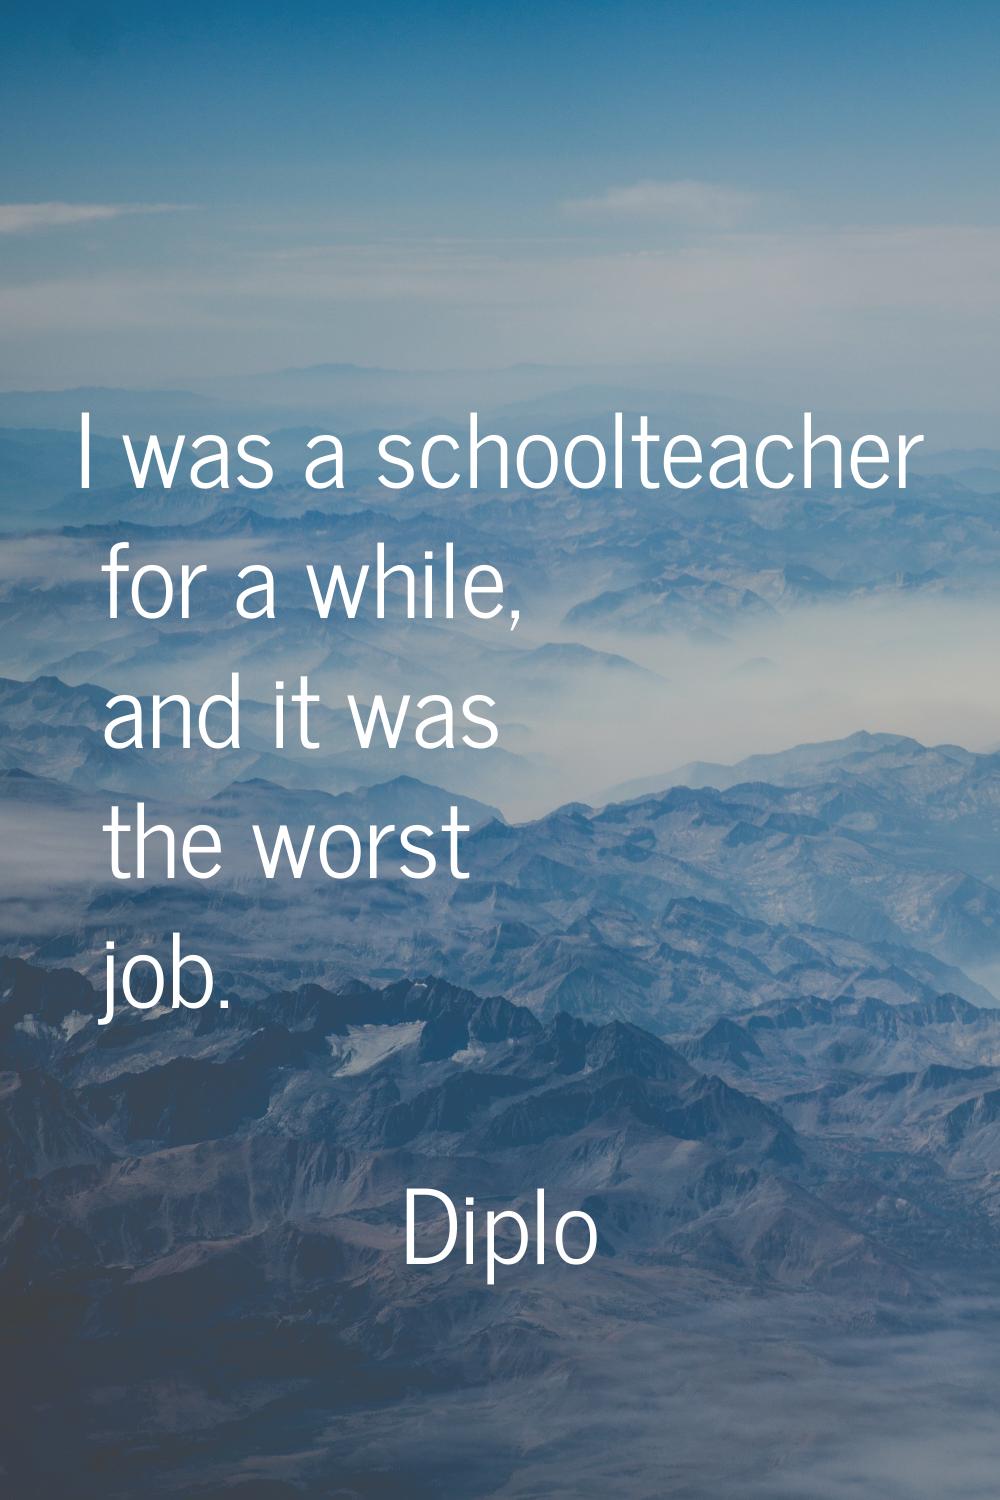 I was a schoolteacher for a while, and it was the worst job.